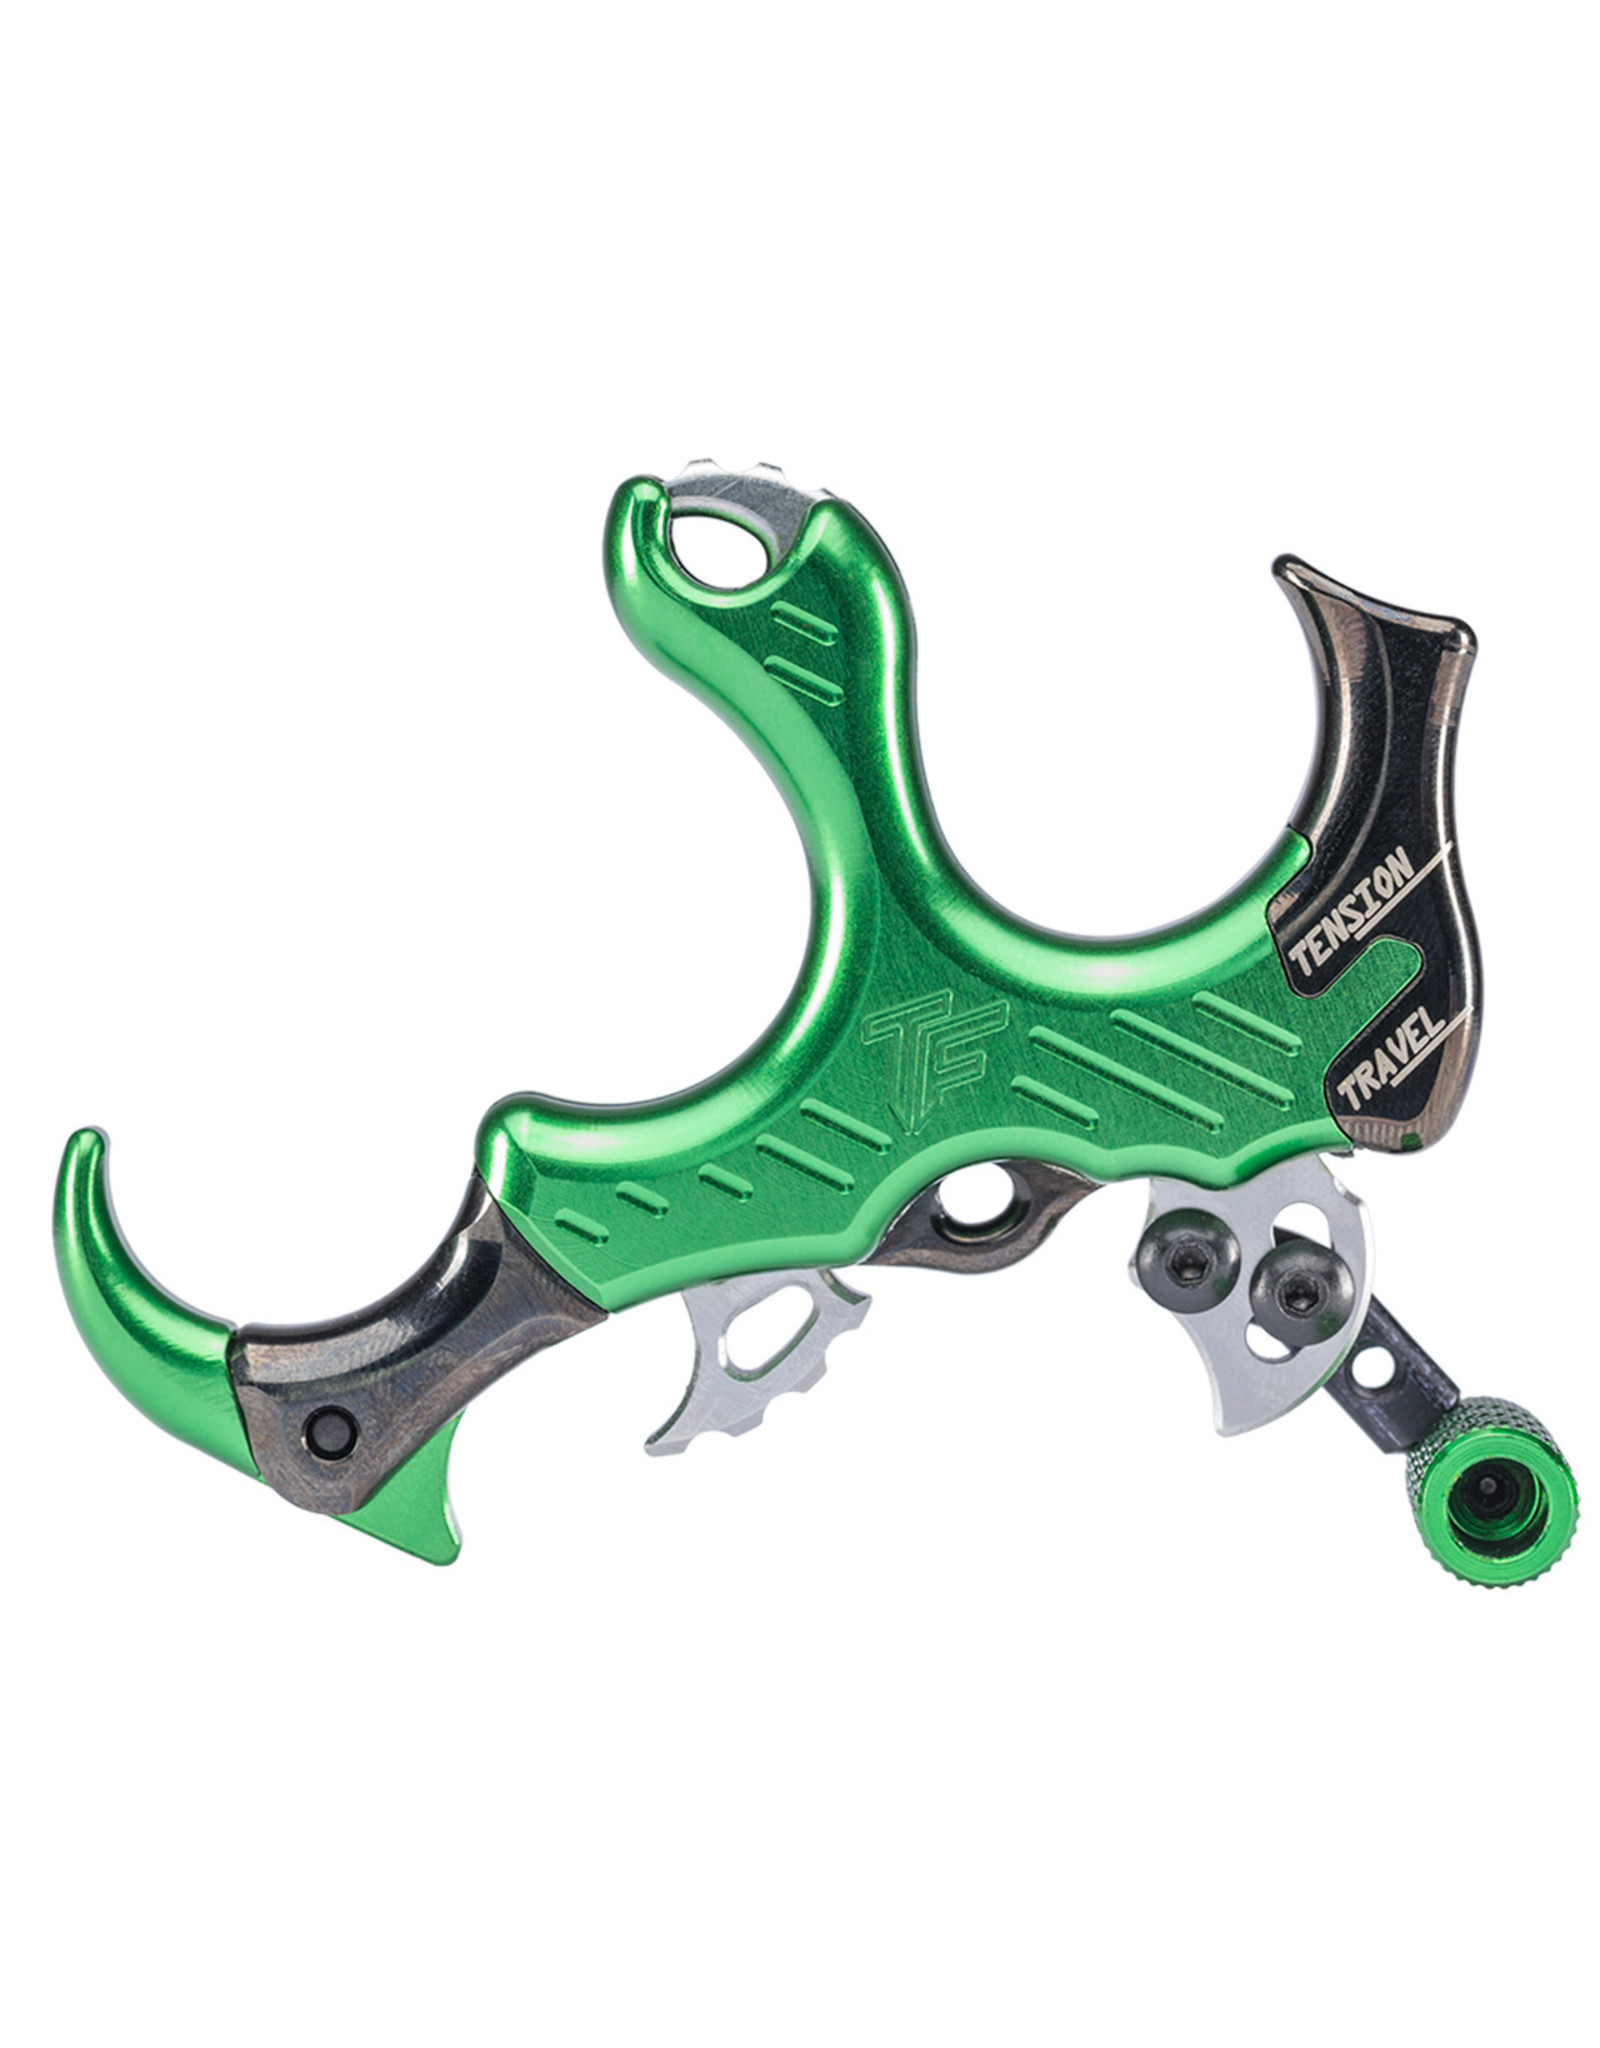 TruFire TruFire Synapse Hammer Throw Green Release